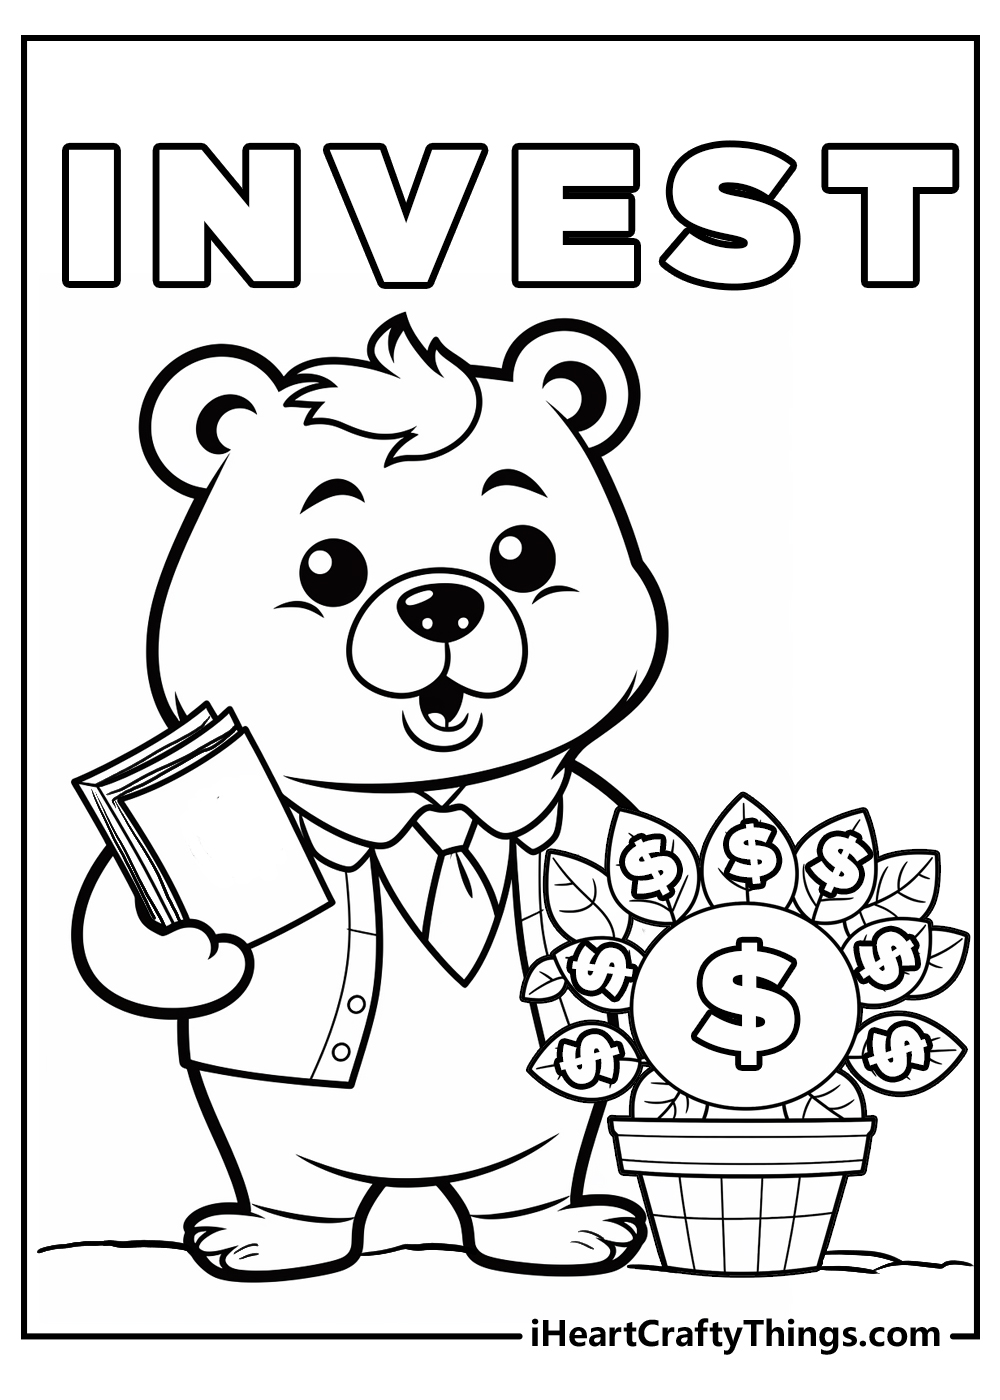 investment money coloring pages